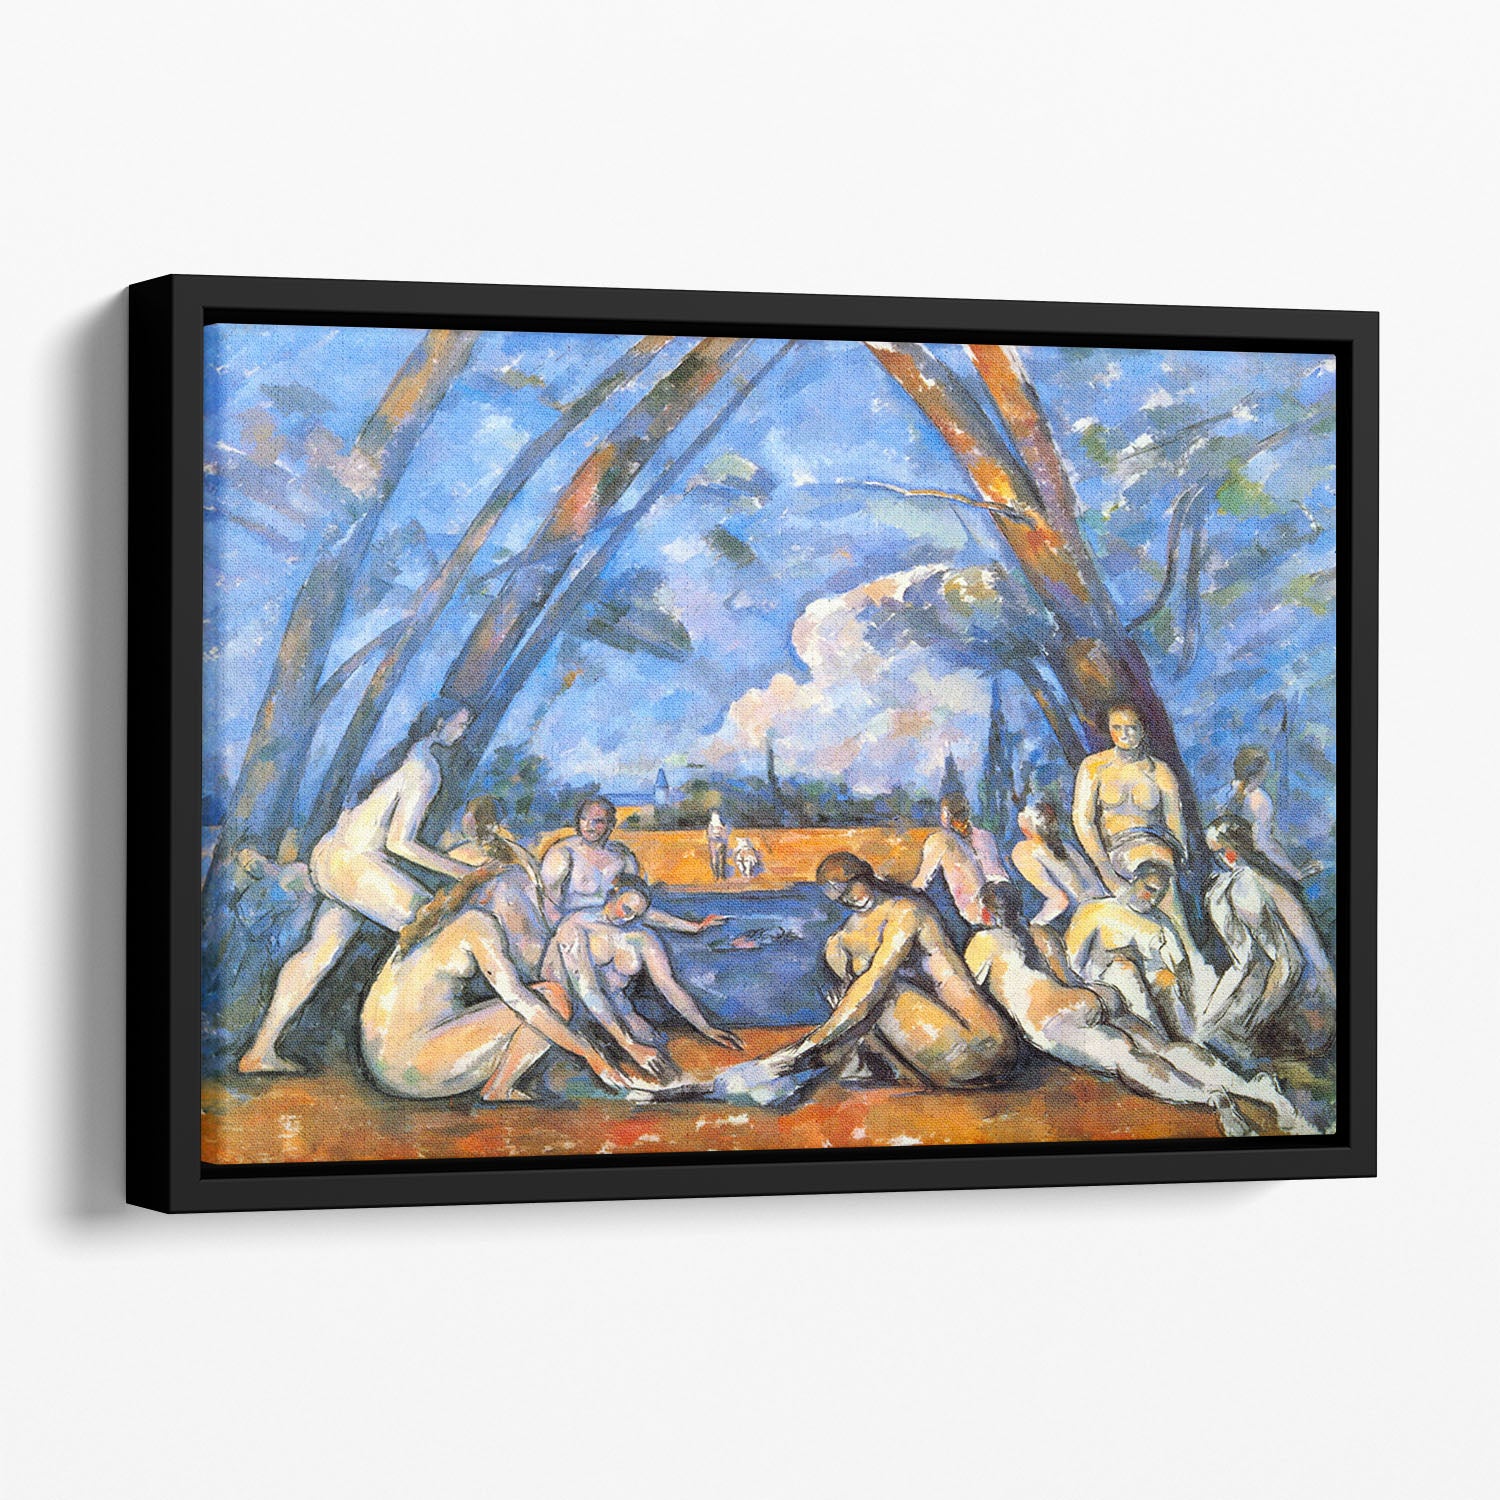 Large Bathers 2 by Cezanne Floating Framed Canvas - Canvas Art Rocks - 1